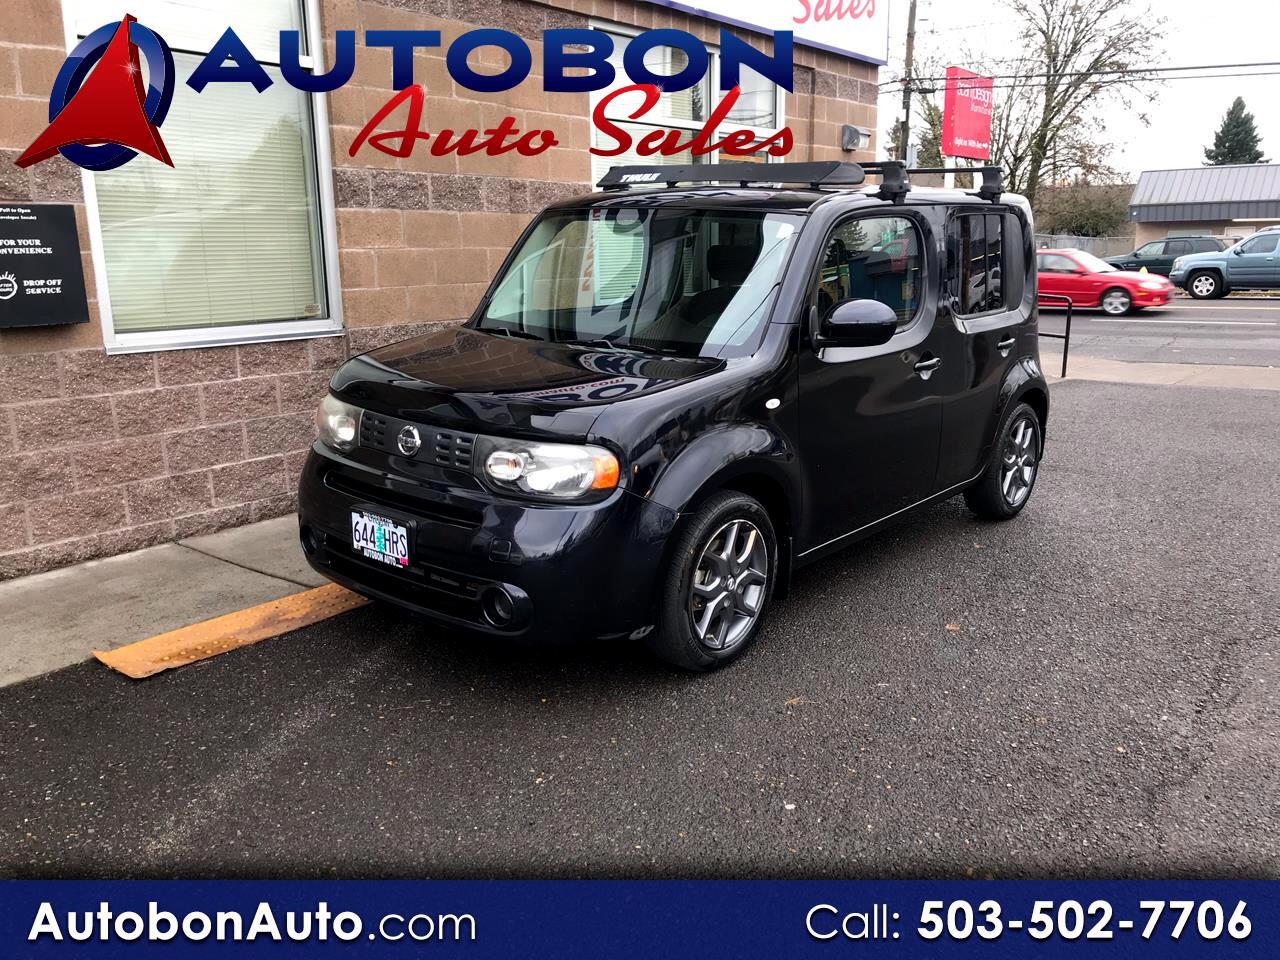 Used 2010 Nissan Cube 5dr Wgn I4 Cvt 1 8 Sl For Sale In